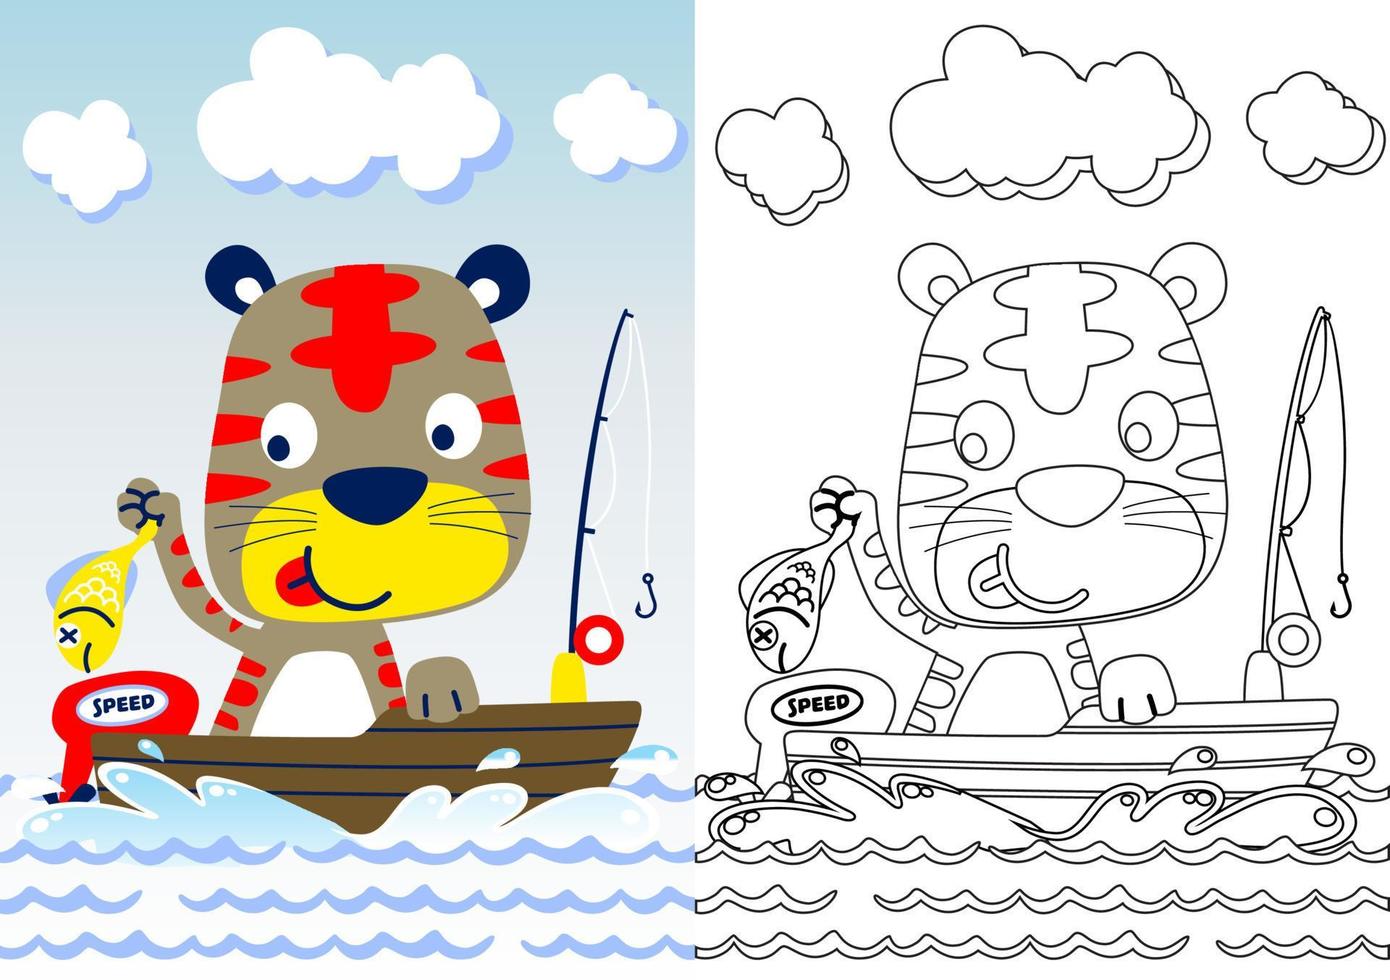 Cute cat fishing on boat, vector cartoon illustration, coloring book or page